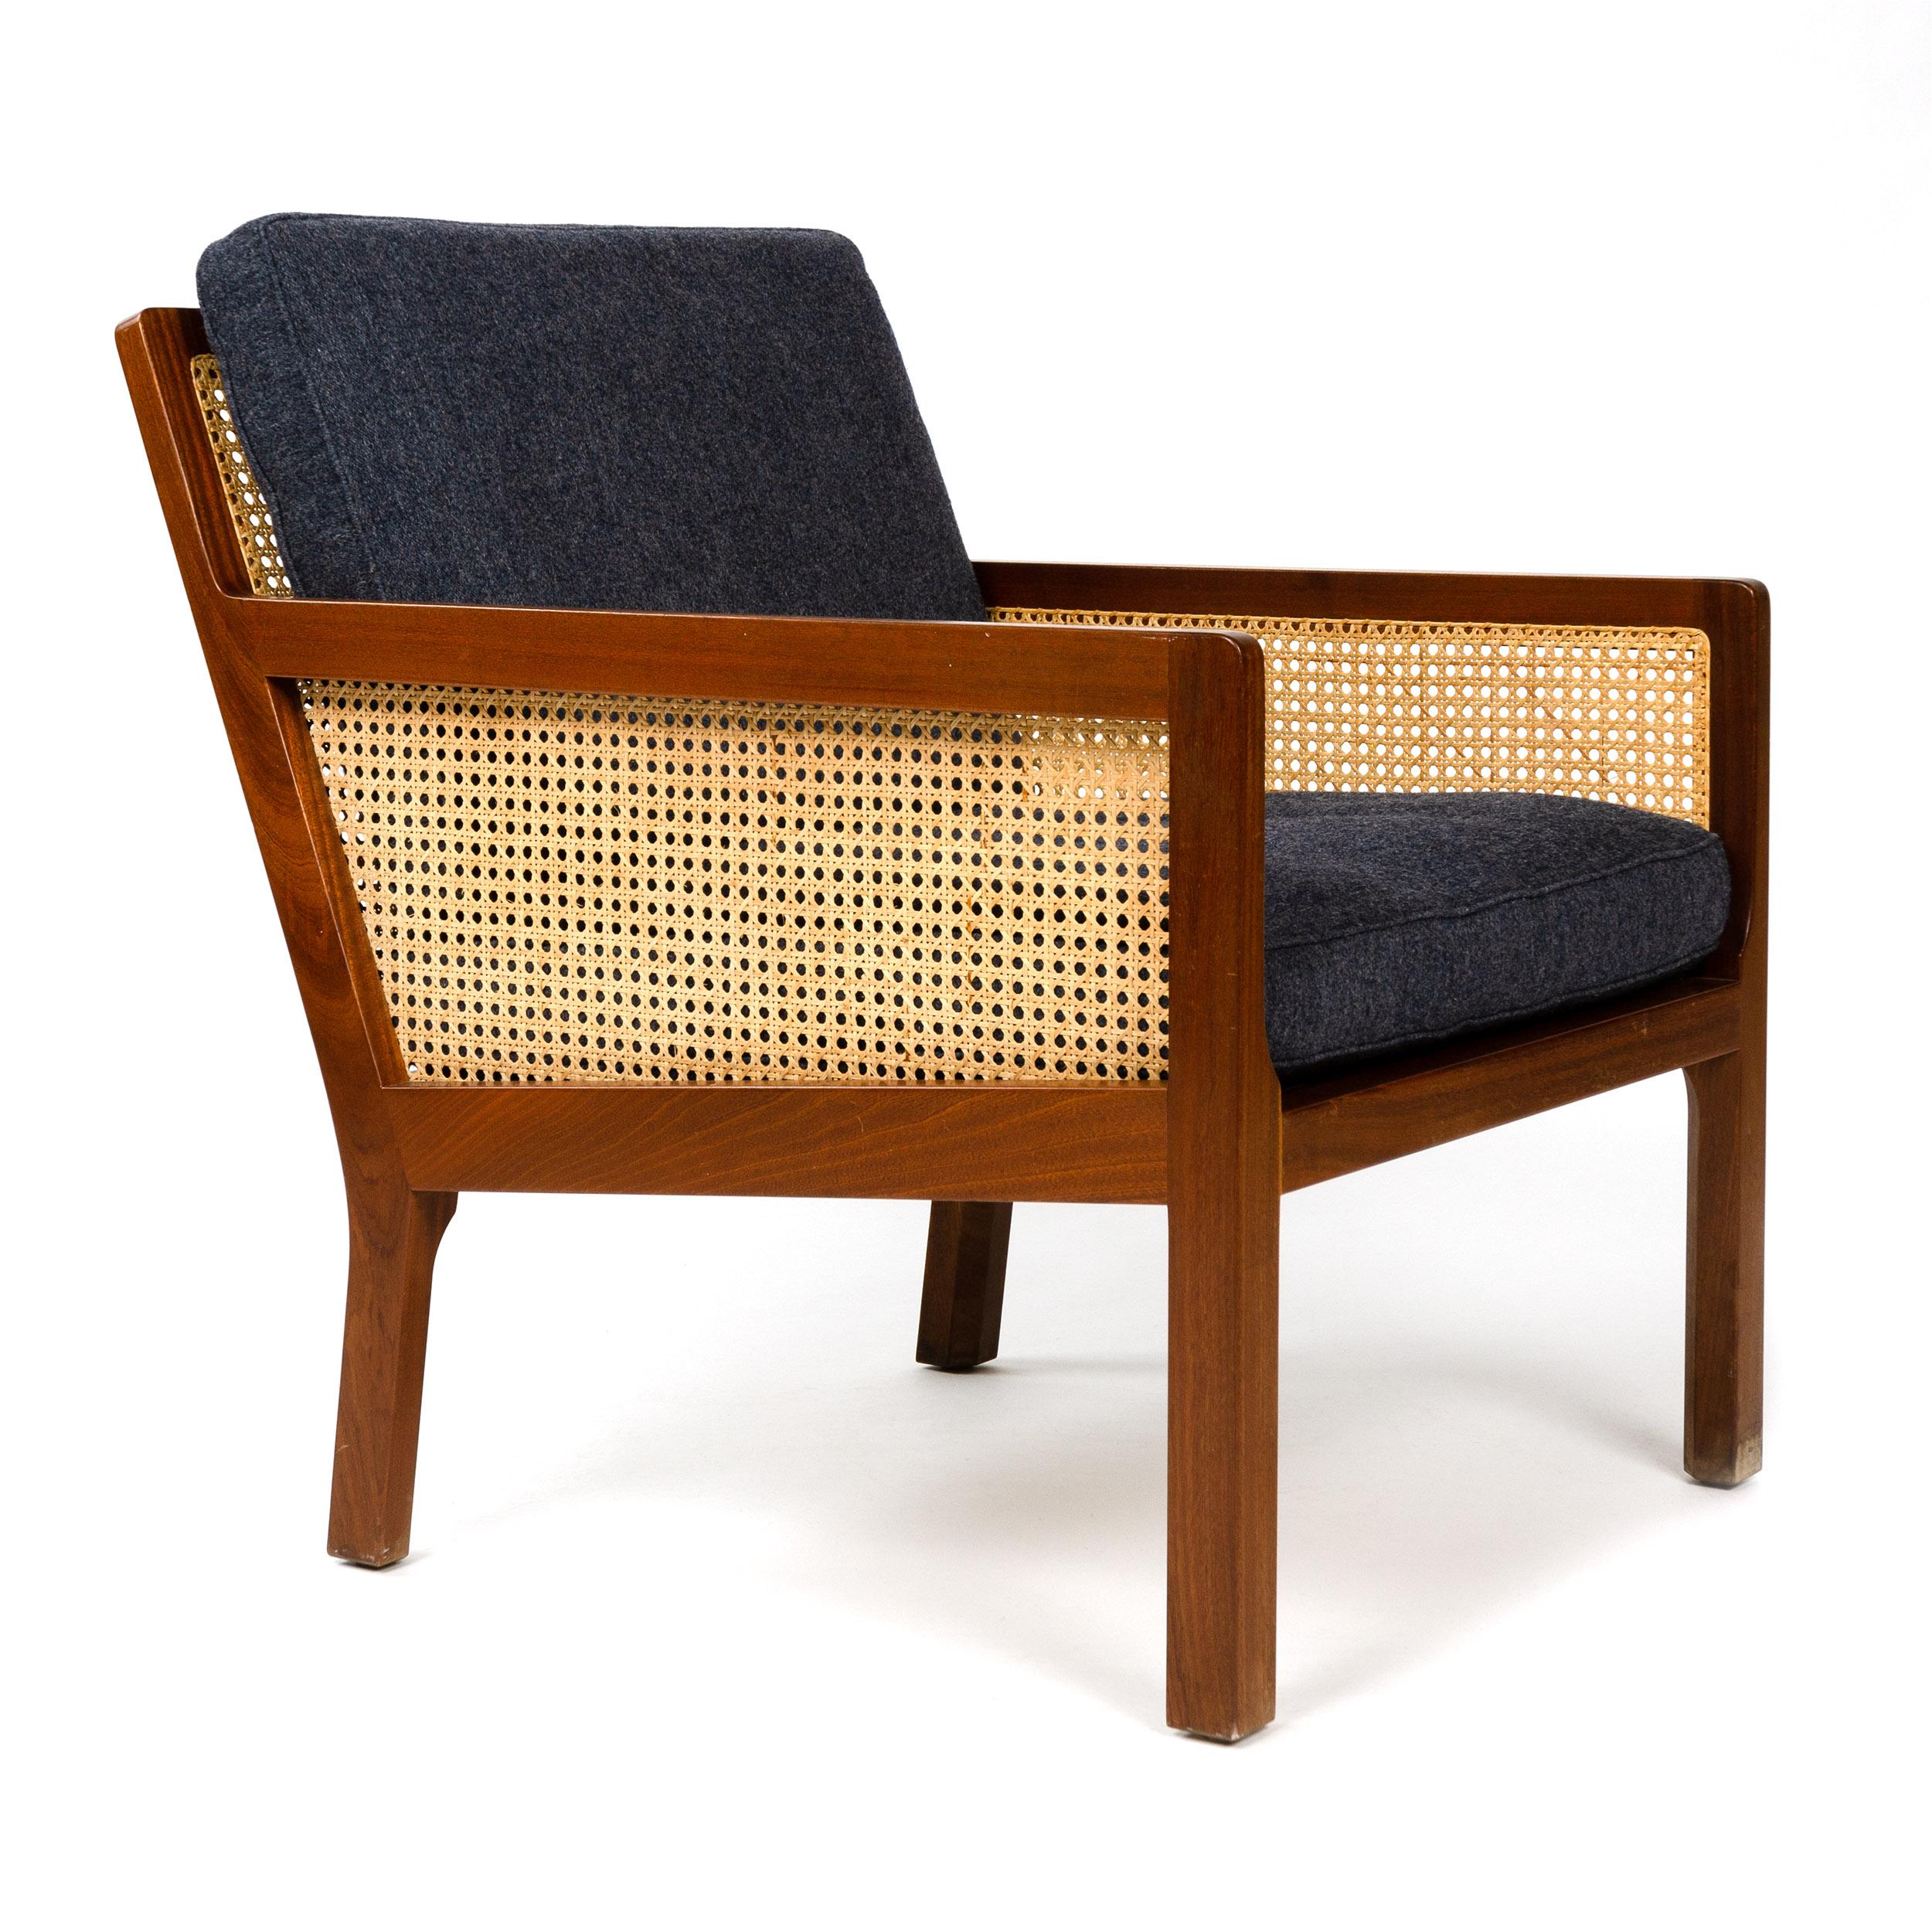 A mahogany lounge chair with traditional hand-caned back and side panels with newly upholstered black Savak wool, seat and back cushions. Designed by Bernt Petersen and crafted by Worts Mobelsnedkeri in Denmark, circa 1962.